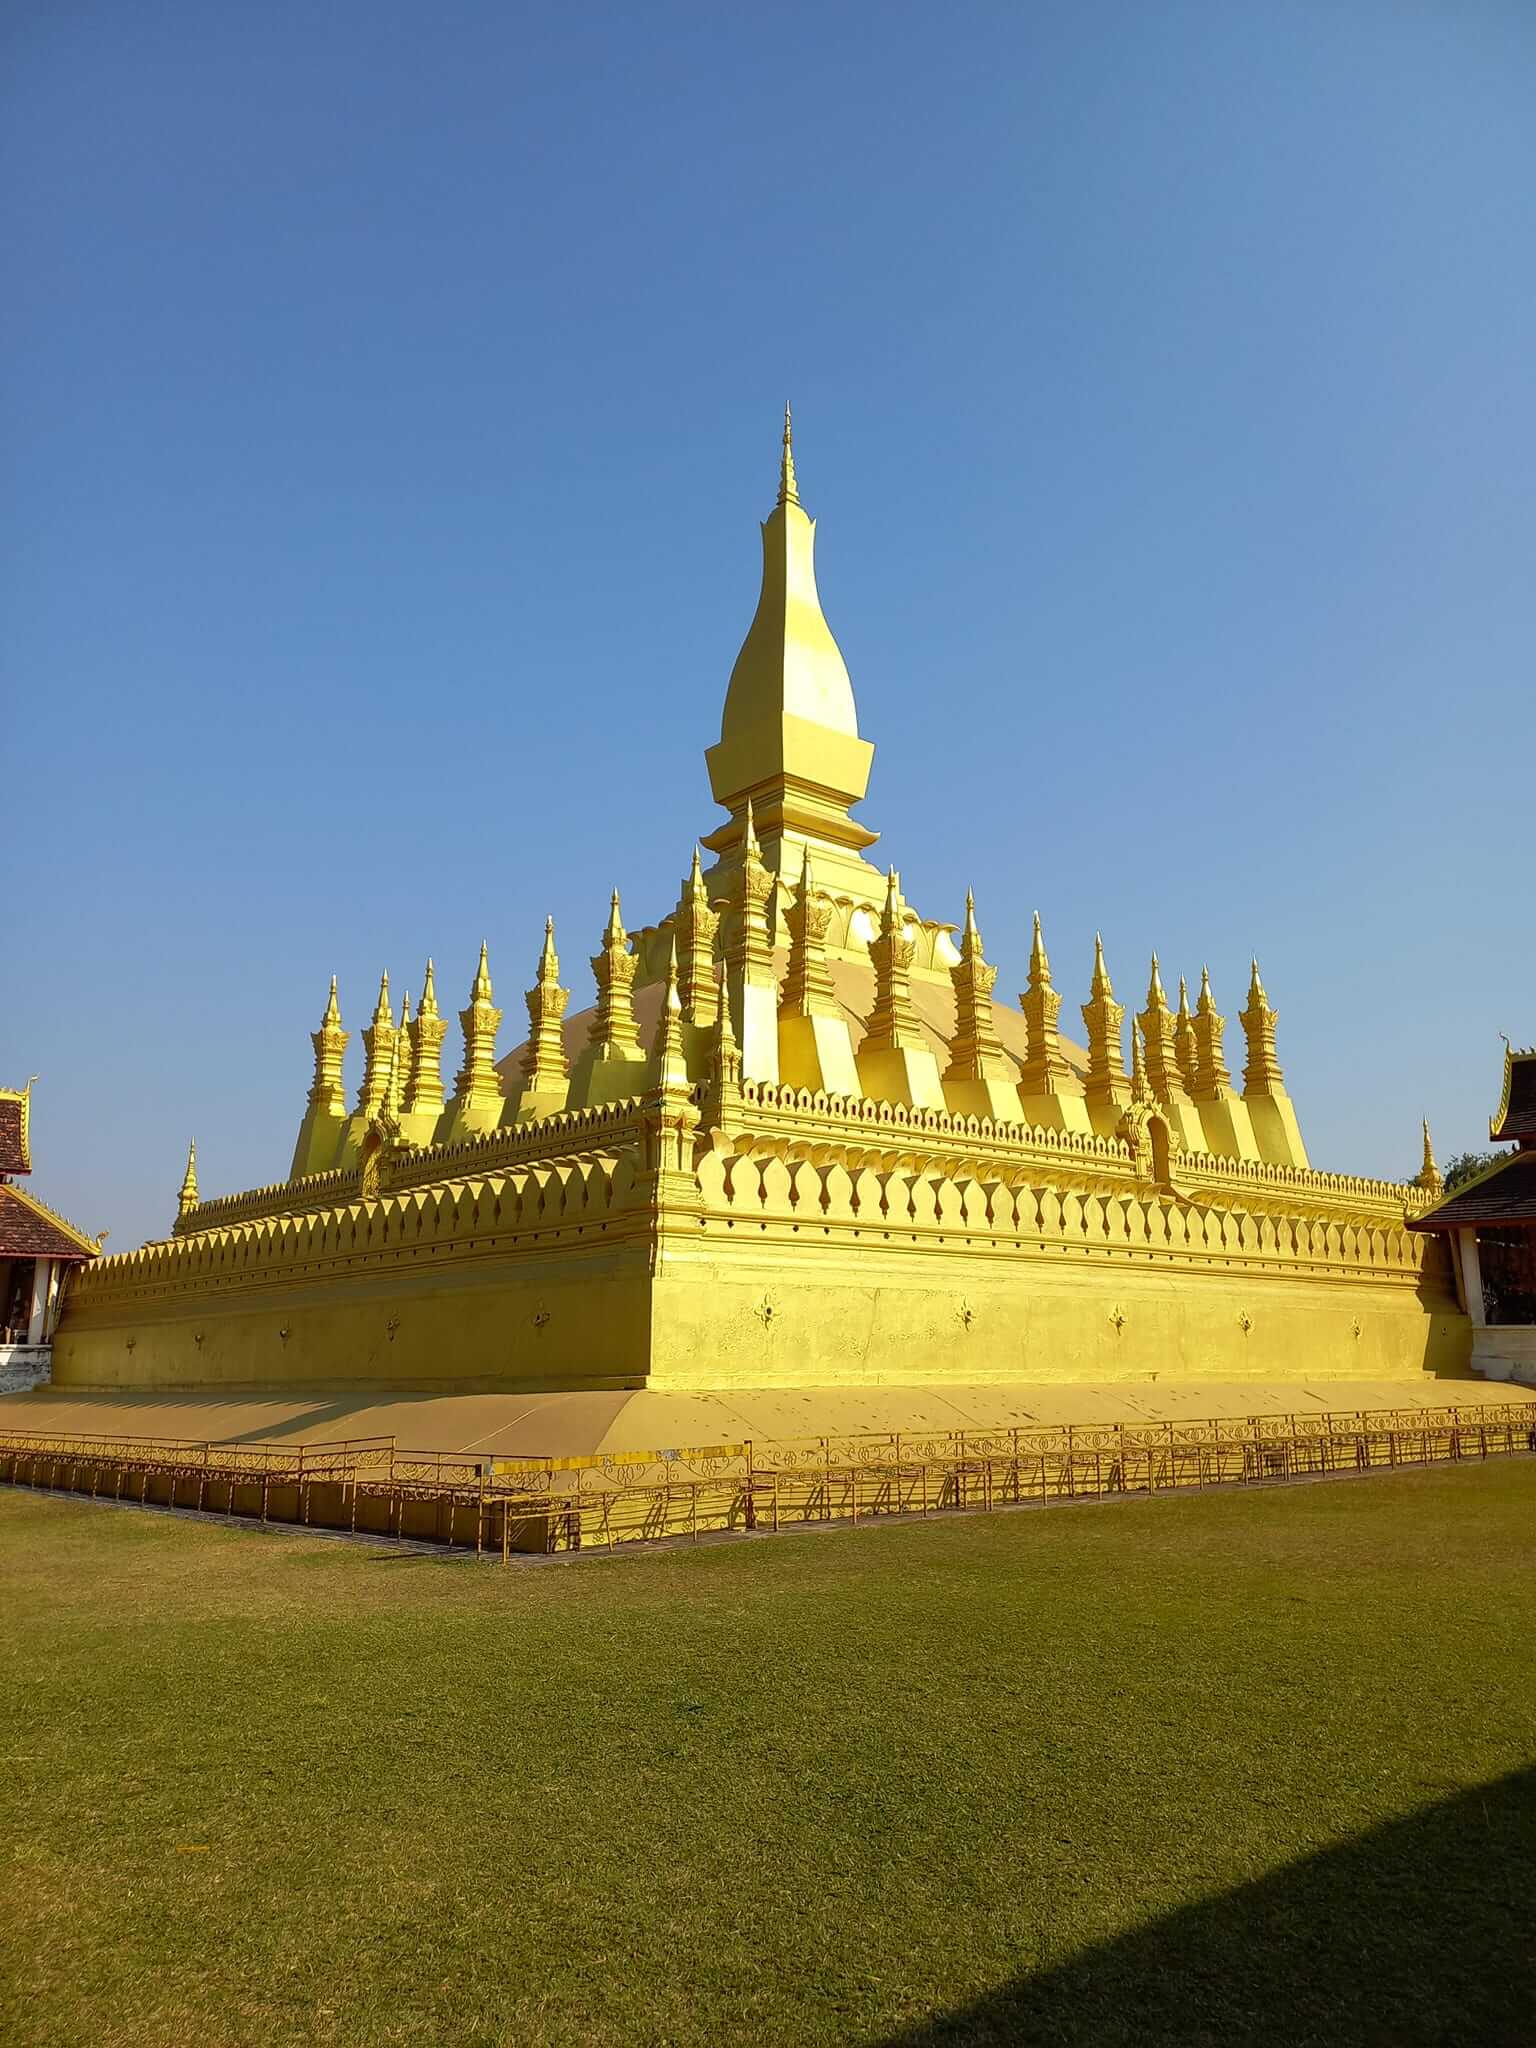 Authentic-Laos-Itinerary-10-Days-Pha-That-Luang-Vientiane-8.jpeg